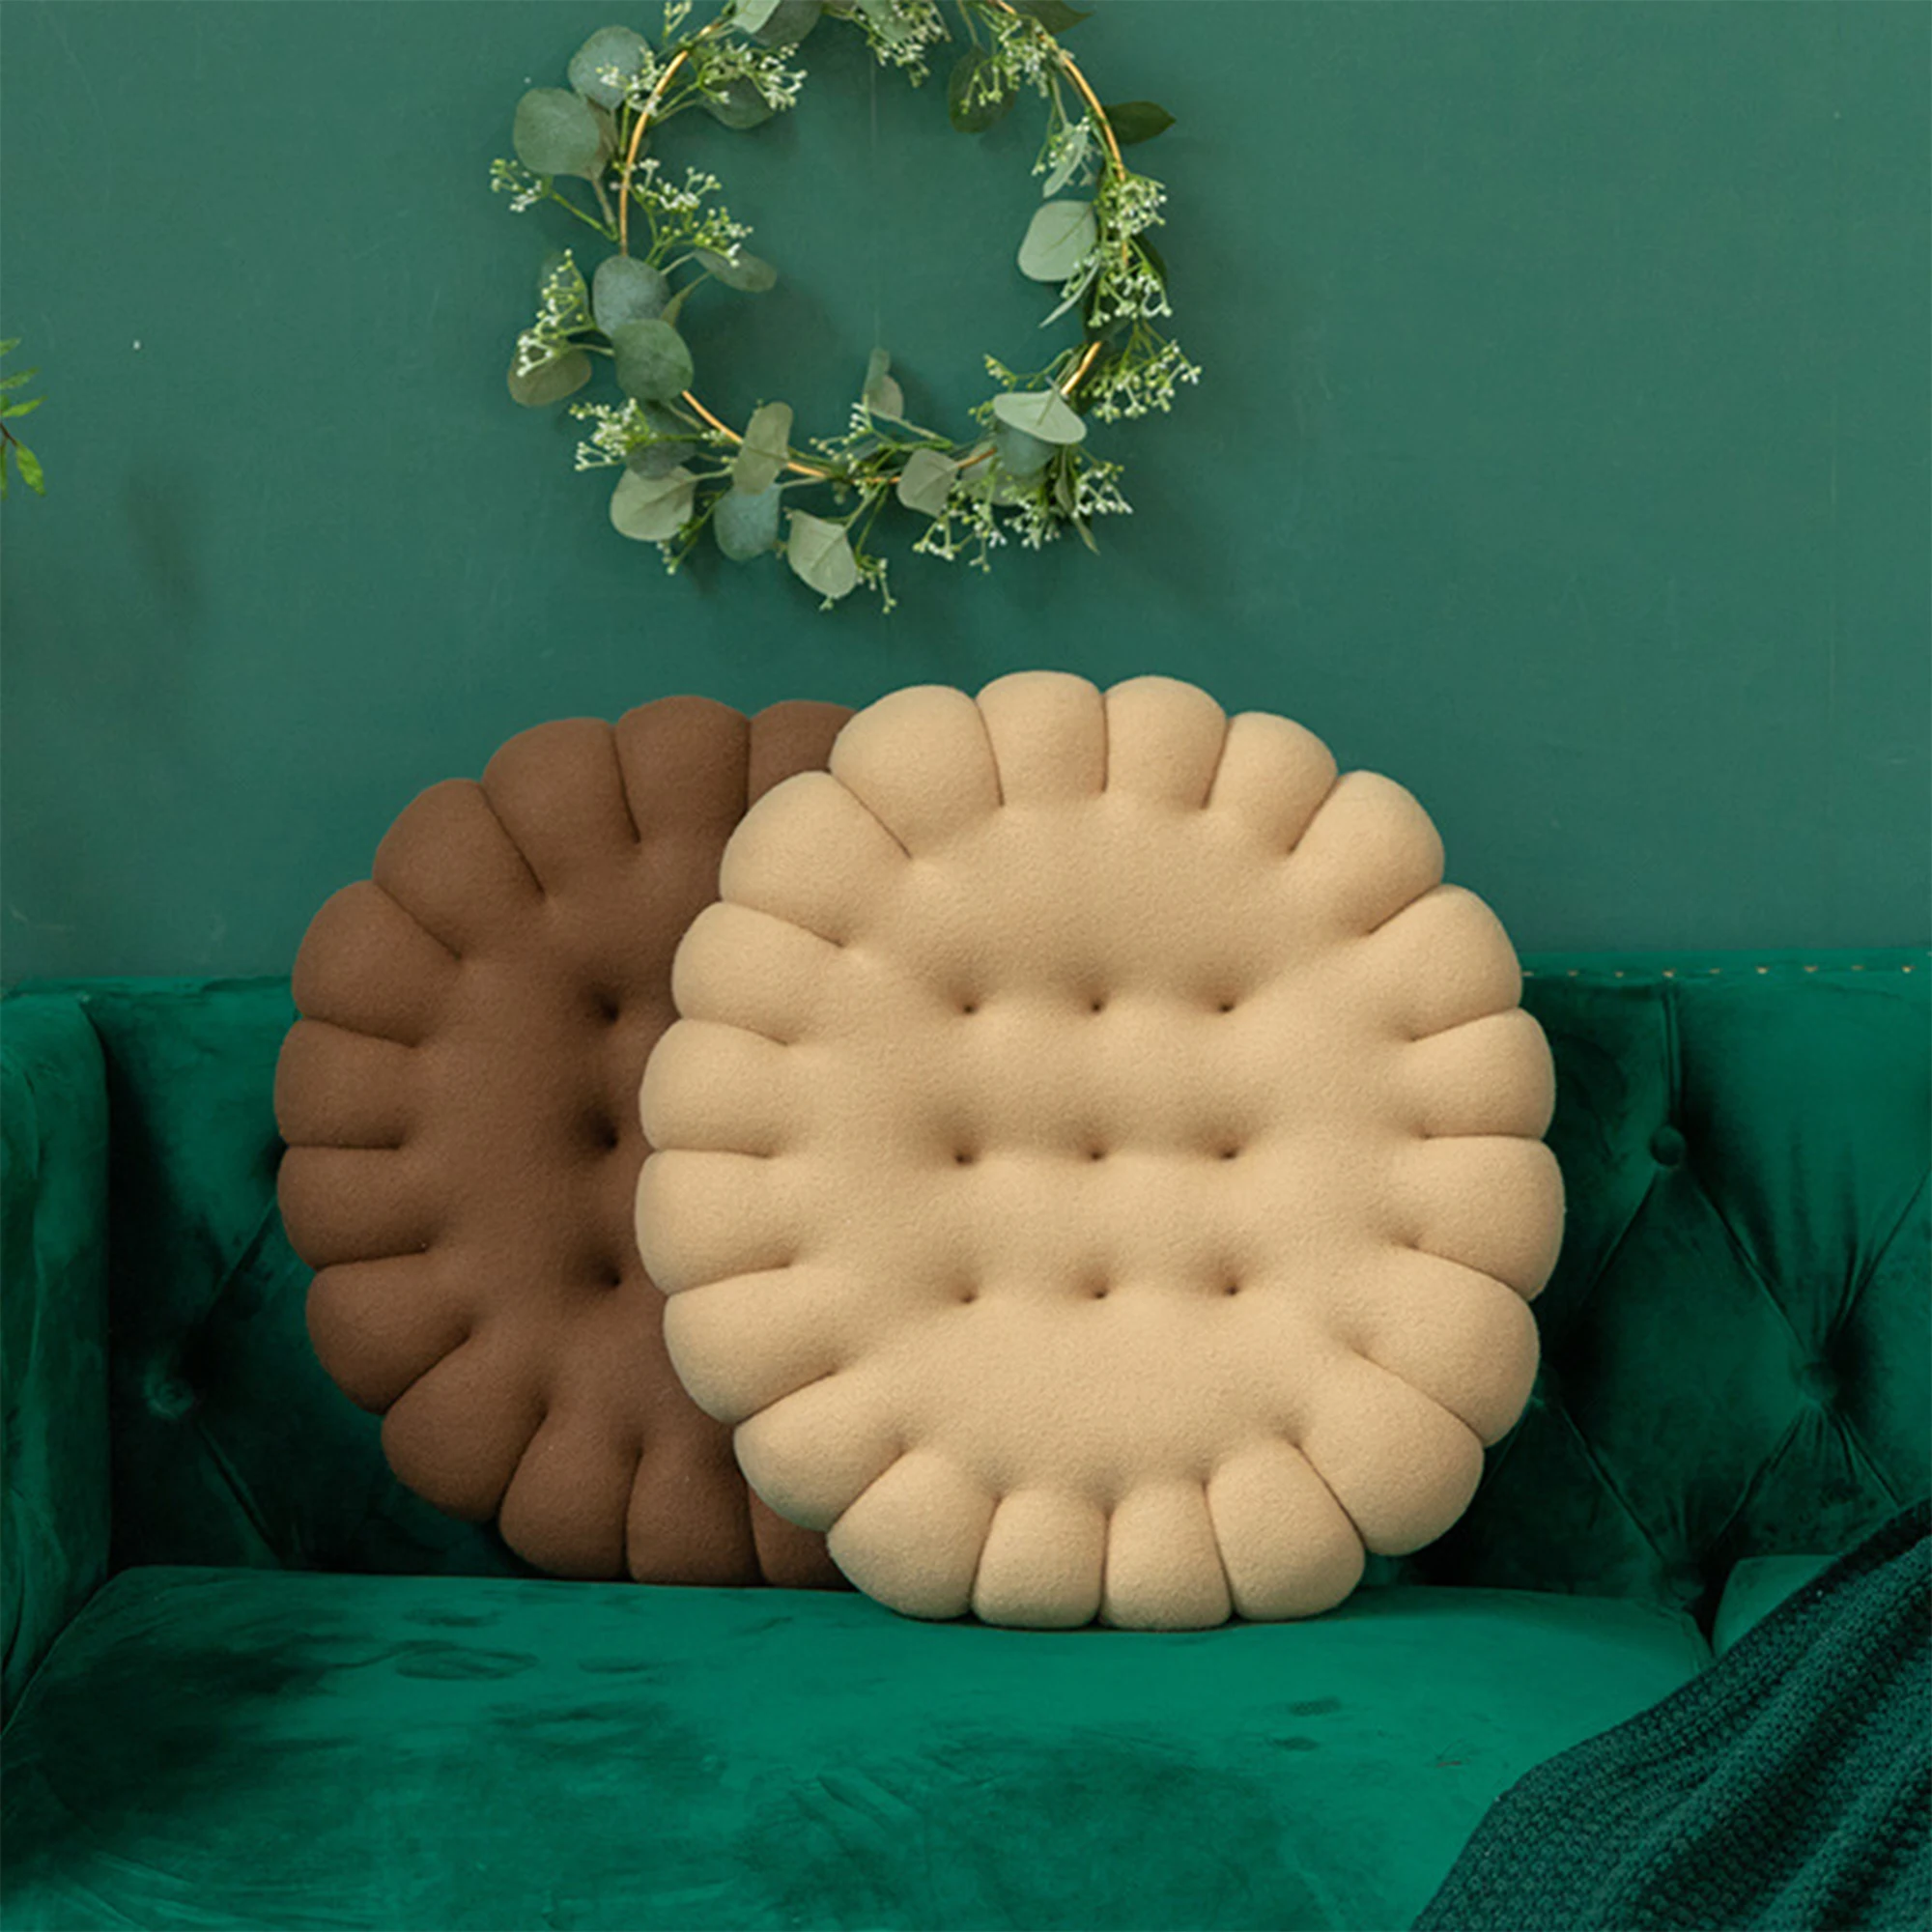 Creative Seat Cushion Solid Color Biscuit Shaped Mat Back Cushion Indoor Ornament for Floor Bay Window Chair